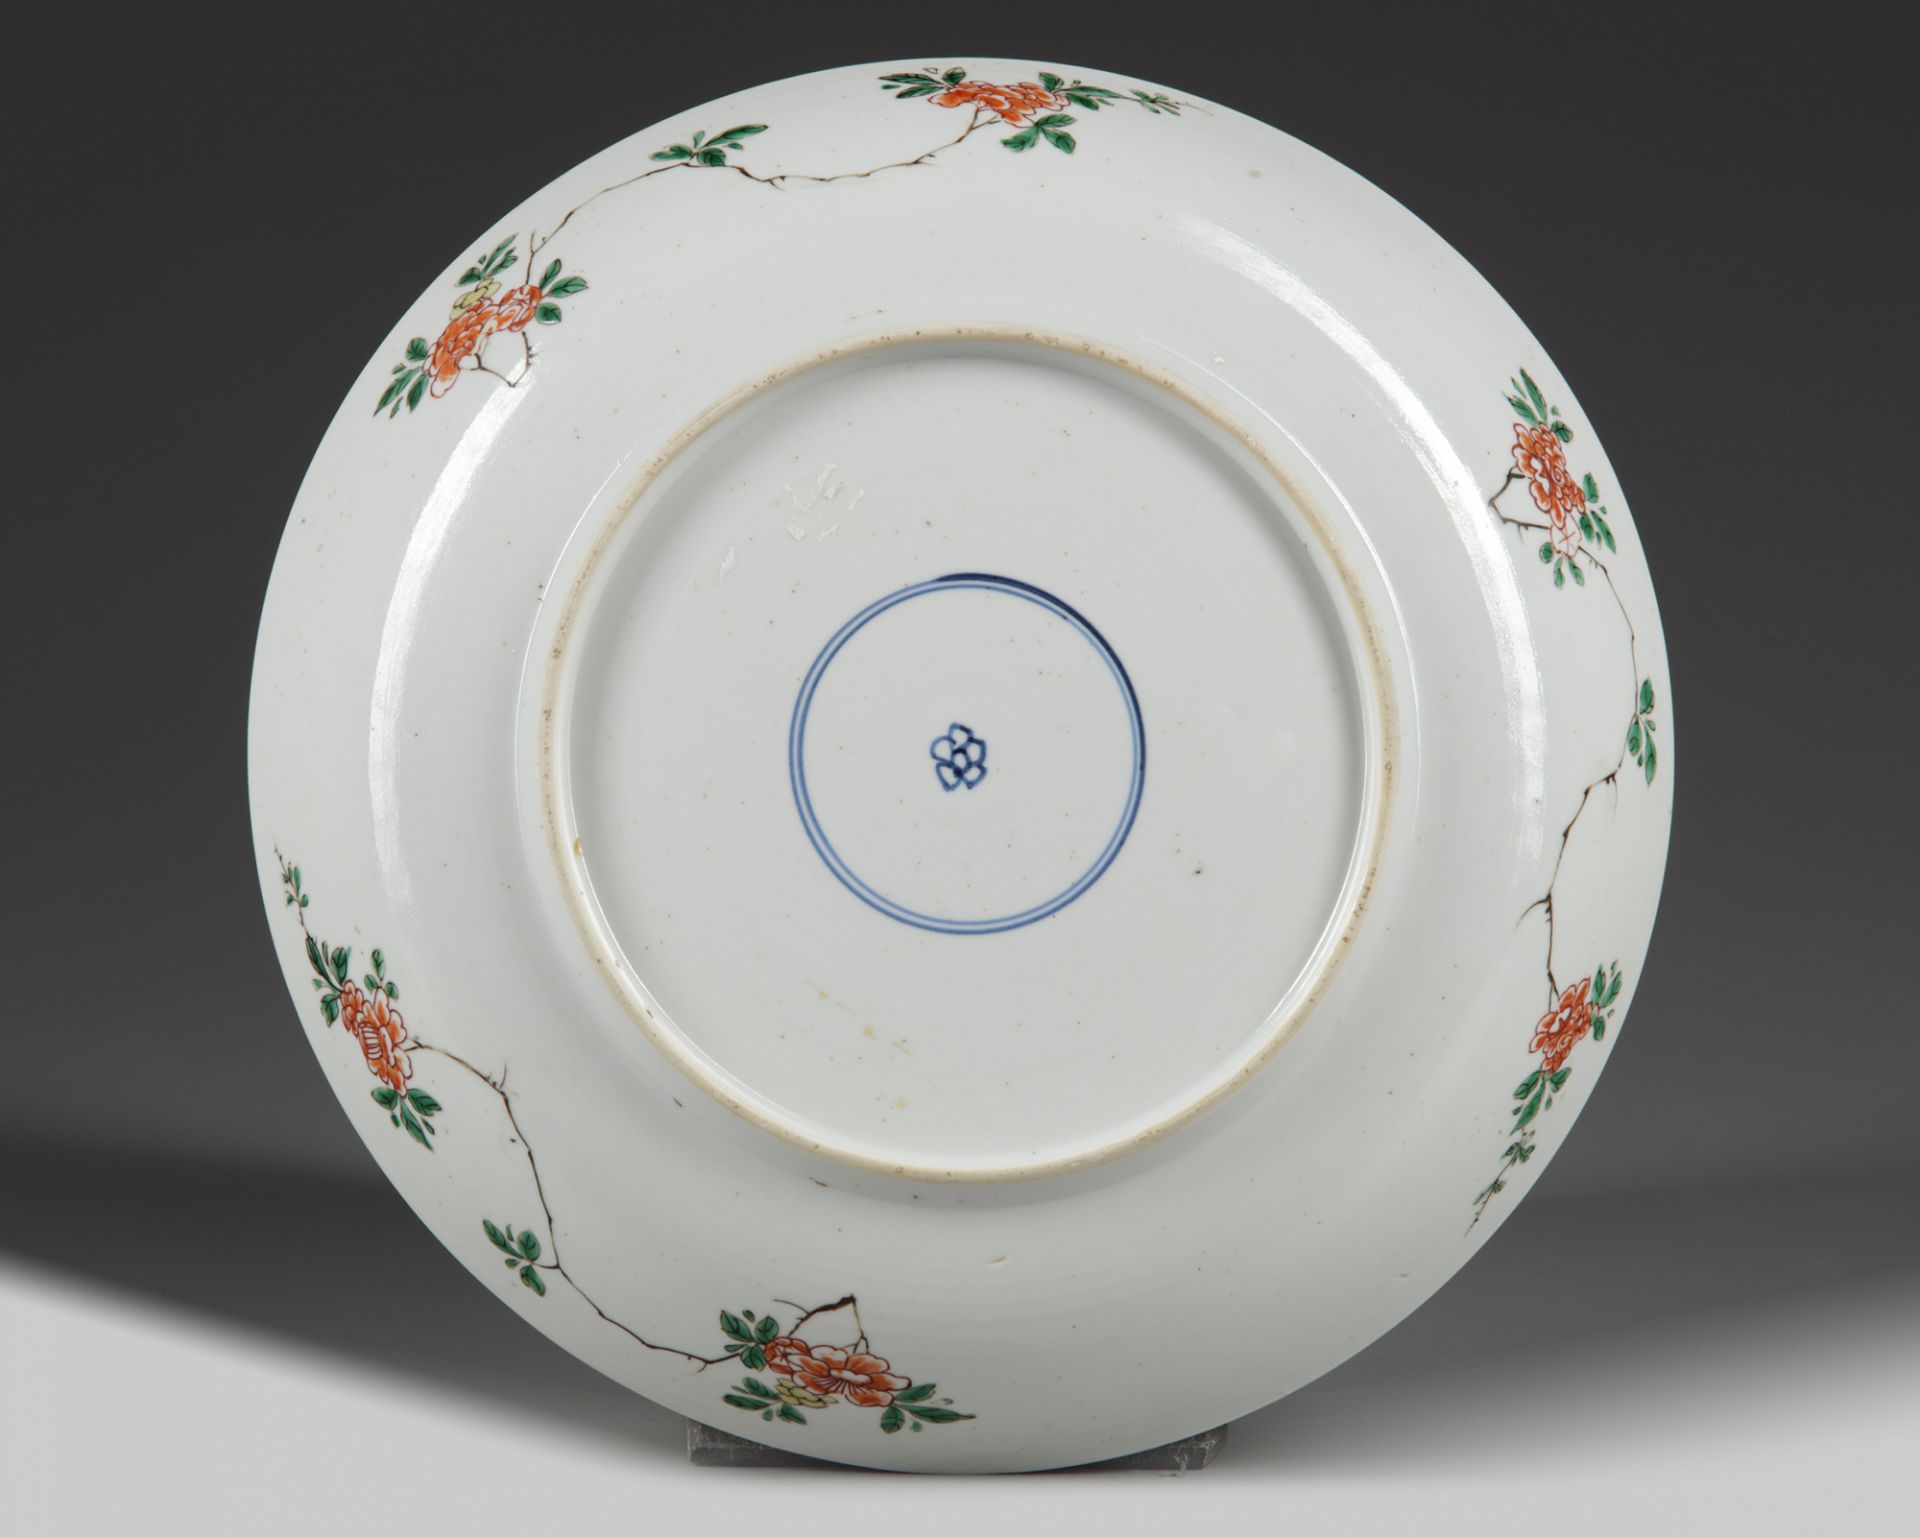 A CHINESE FAMILLE VERTE 'FLORAL' DISH, KANGXI PERIOD (1662-1722) - Image 2 of 2